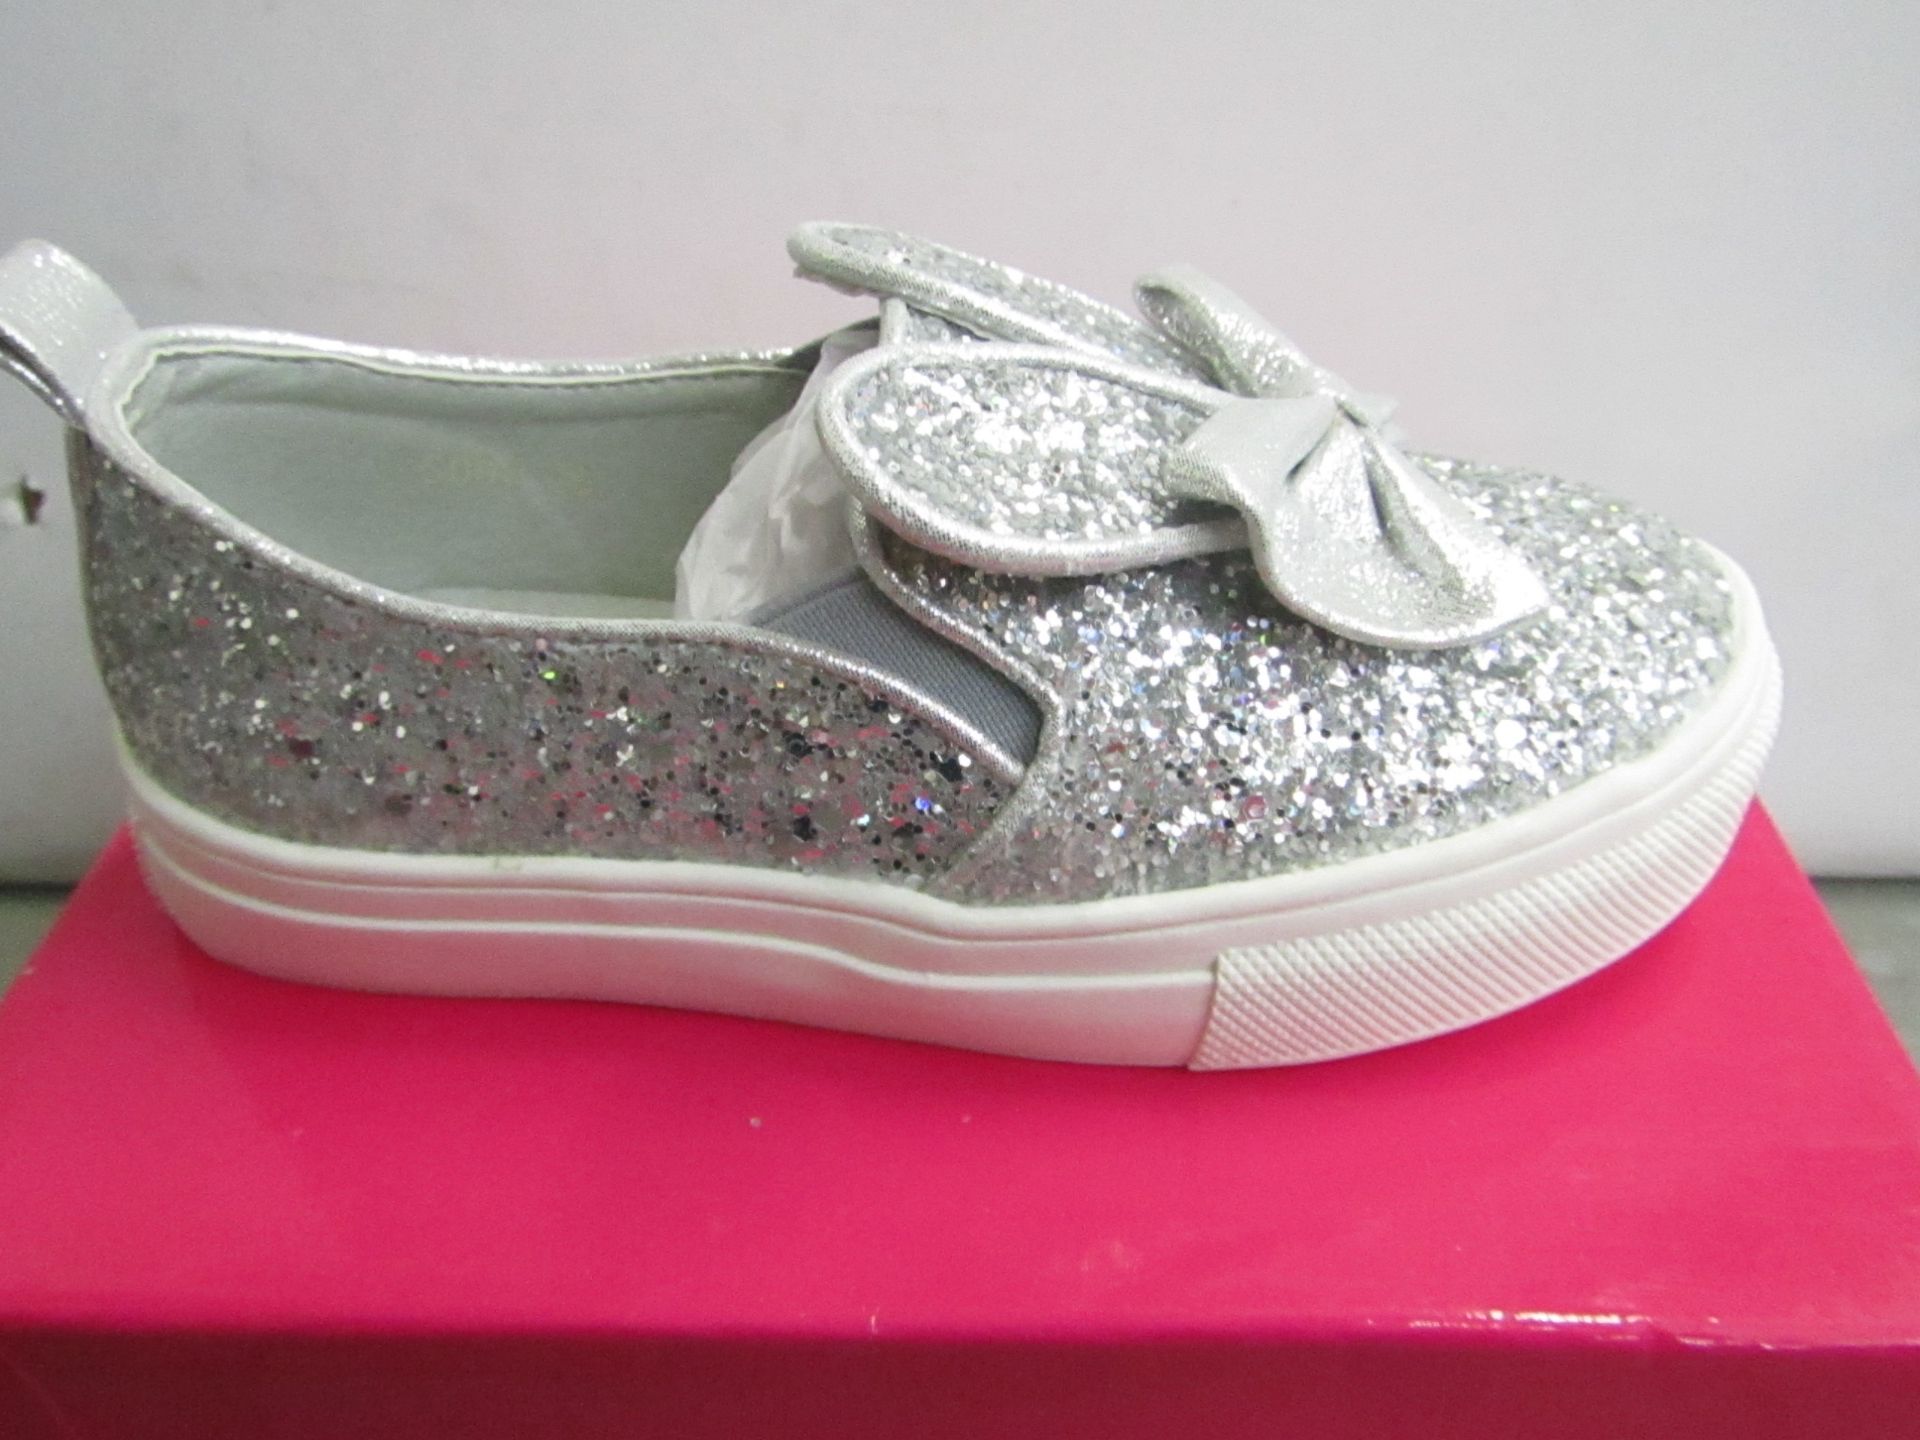 Miss Sophia Girls silver shoe with sequence  design on the main body of the shoe also bow on